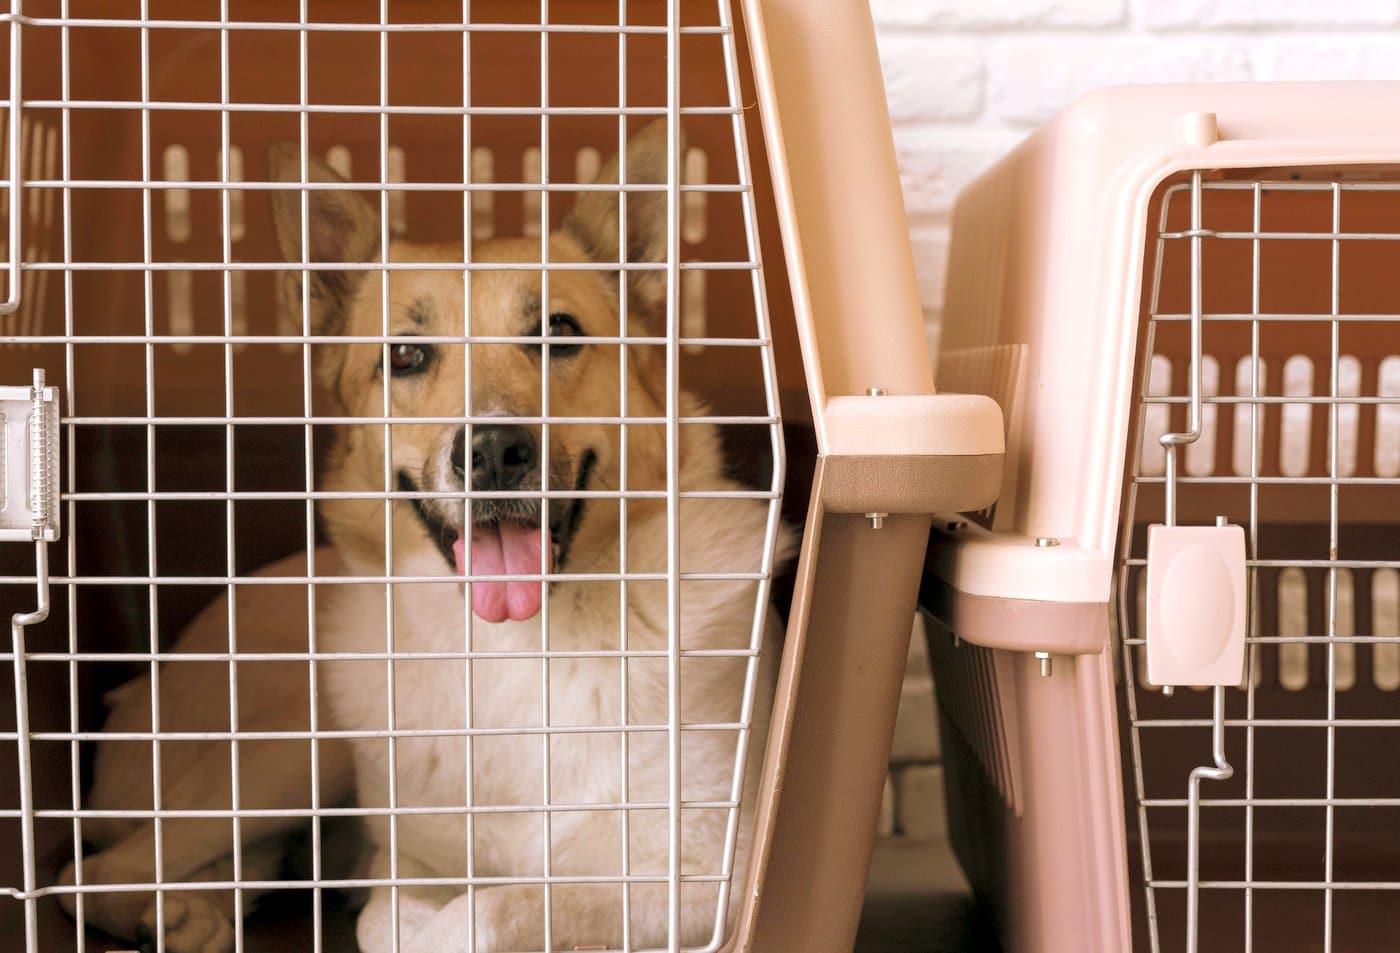 Cute happy dog in a kennel cage